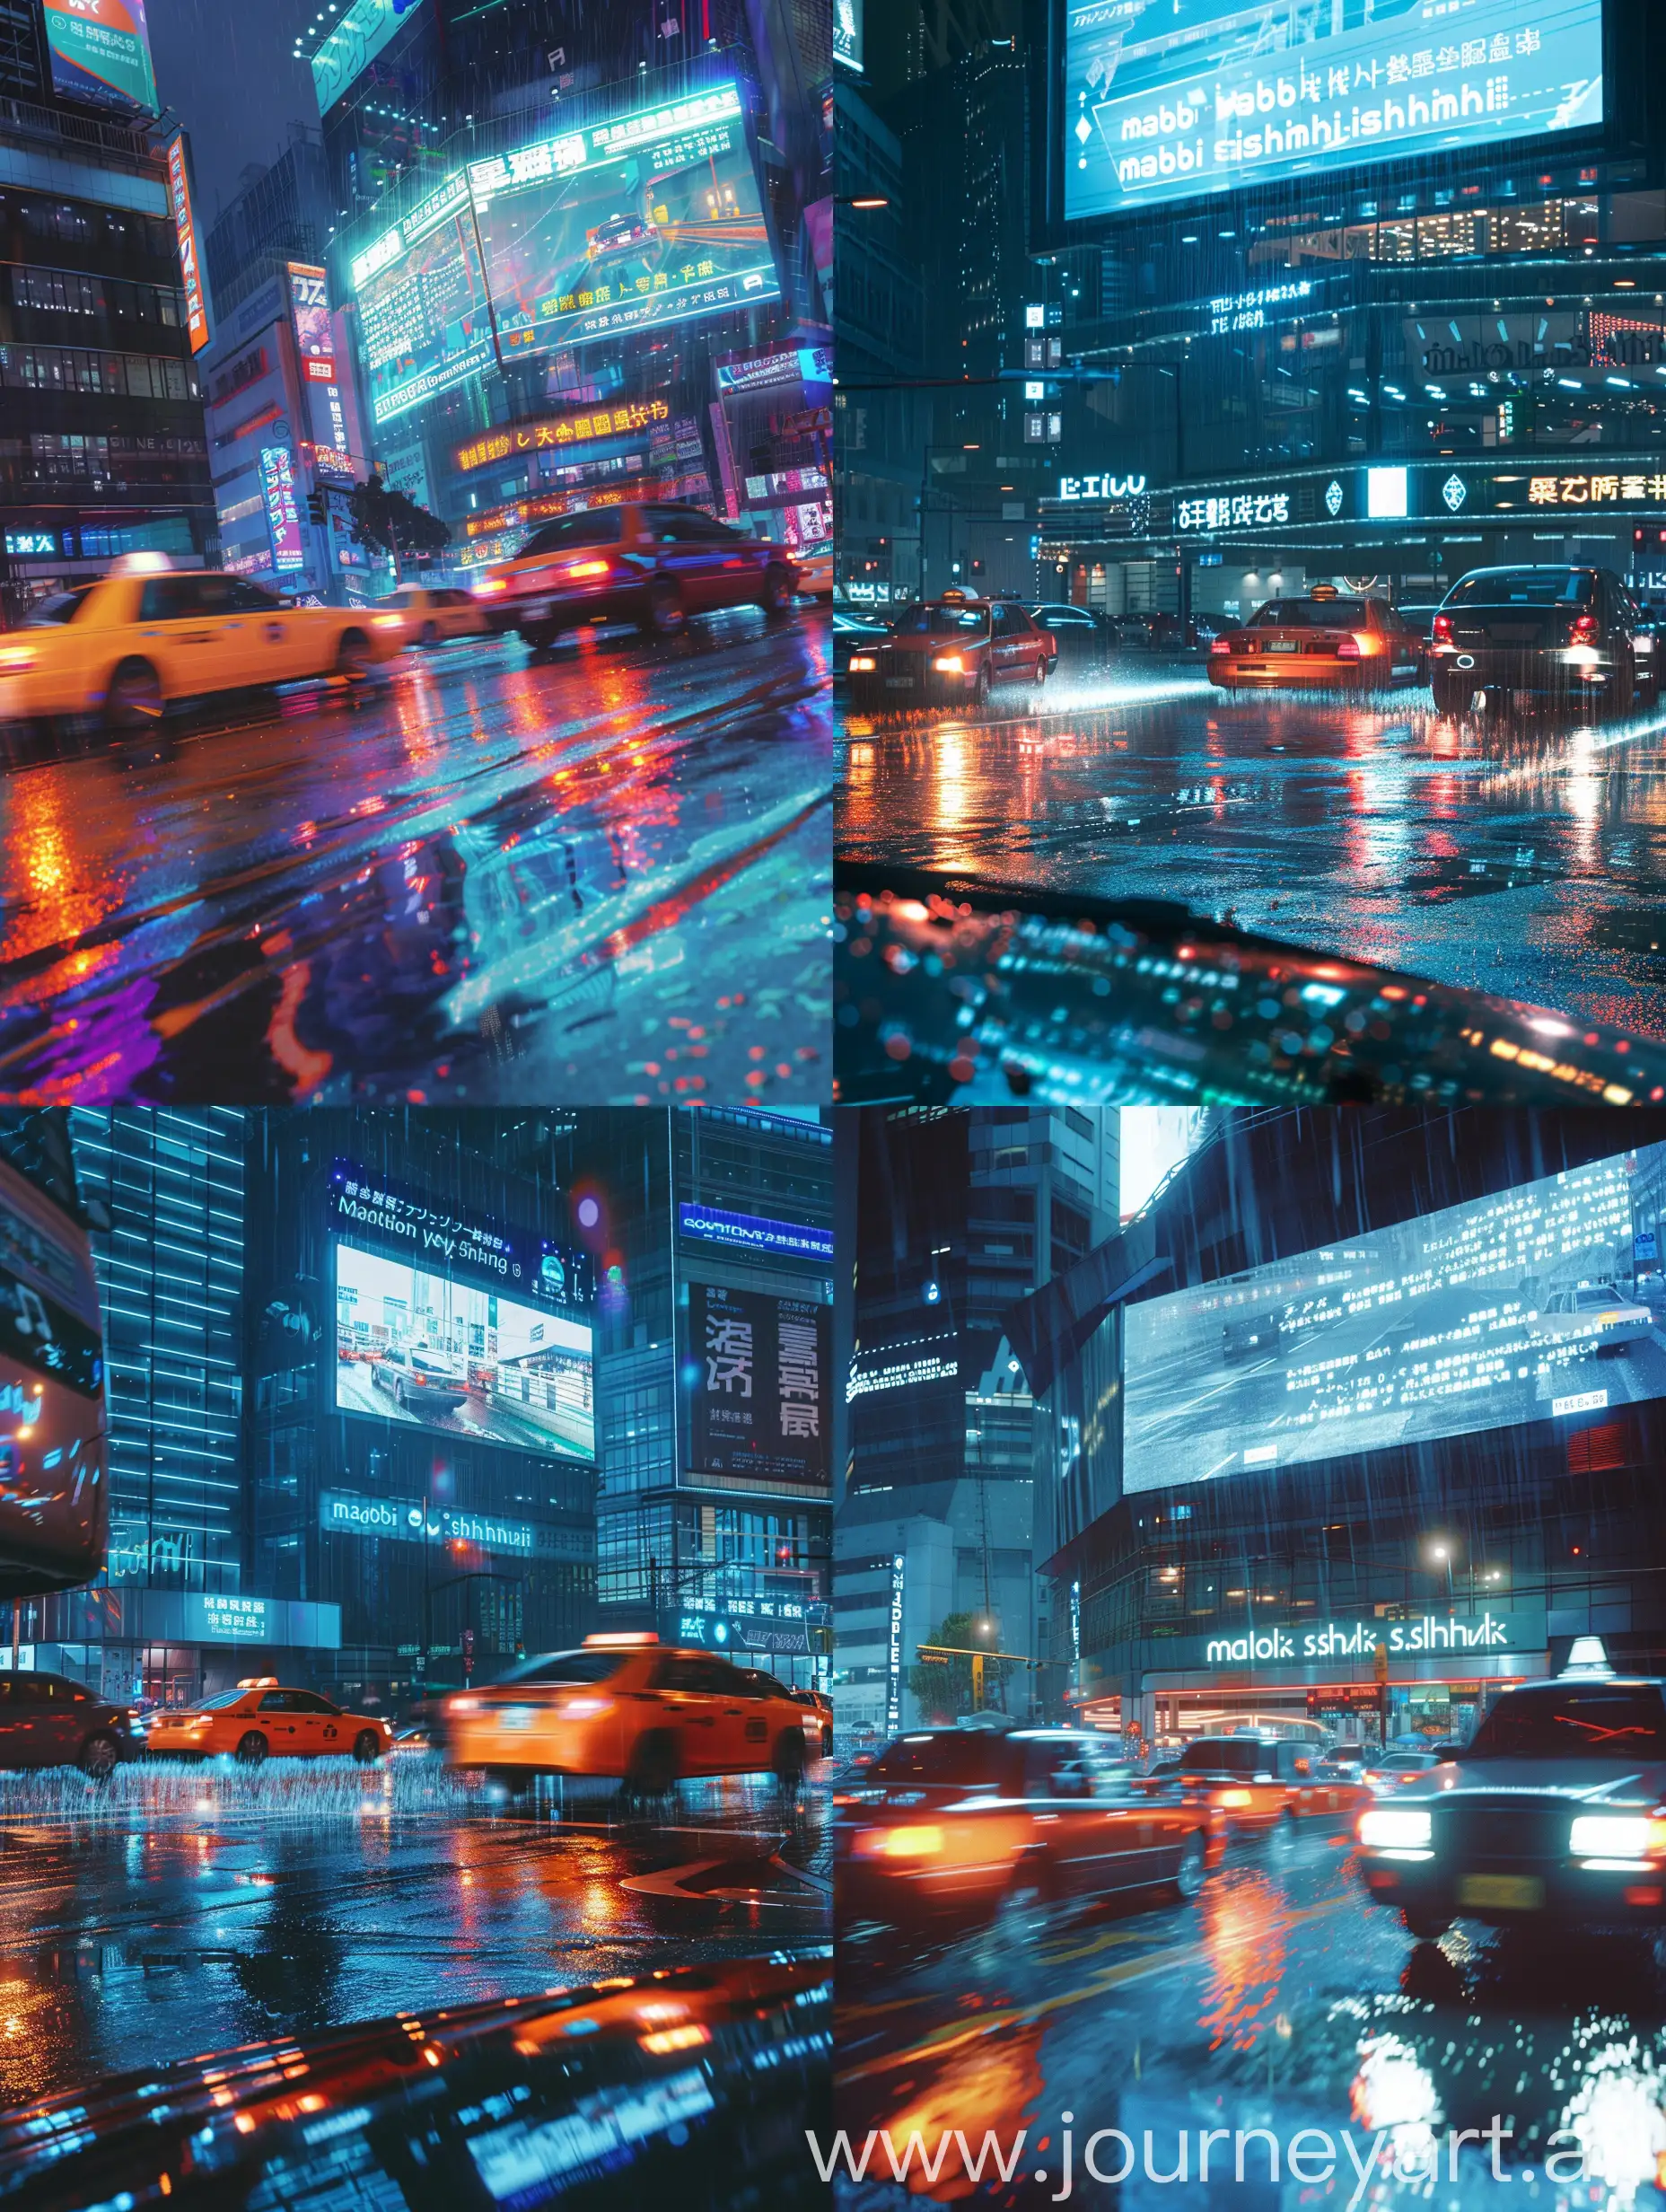 Rainy-Night-Street-Scene-with-Neon-Lights-and-Anime-Style-Building